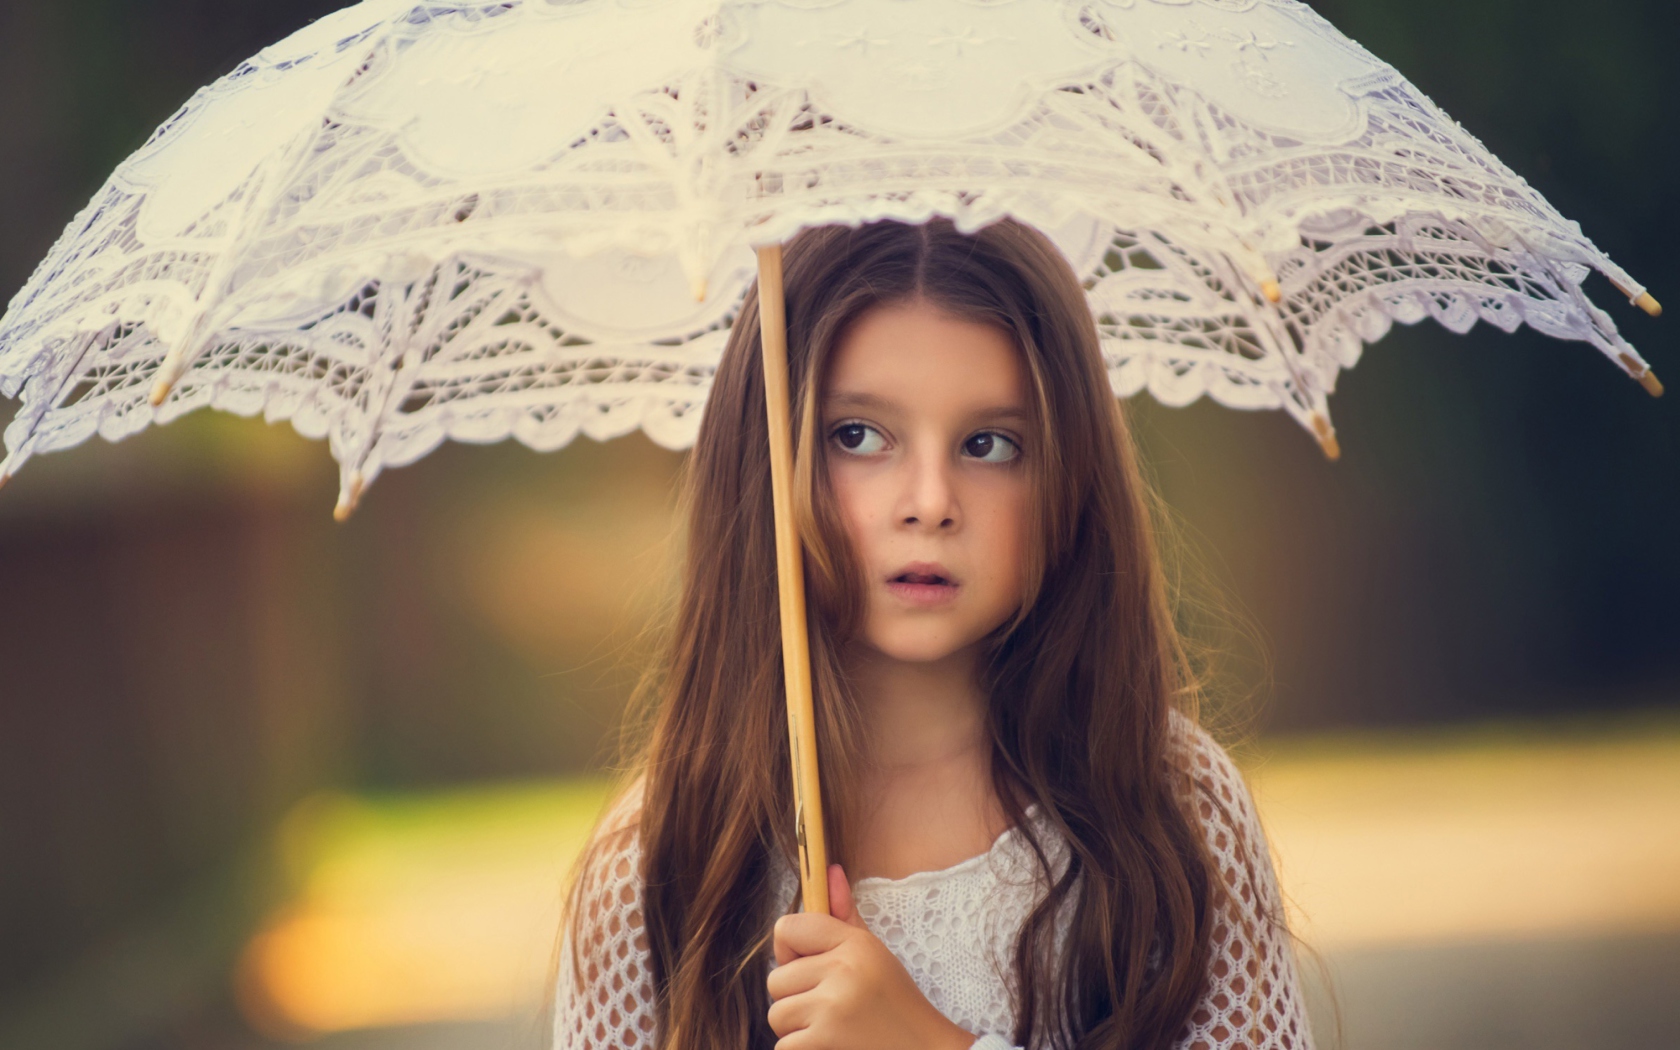 Girl With Lace Umbrella wallpaper 1680x1050